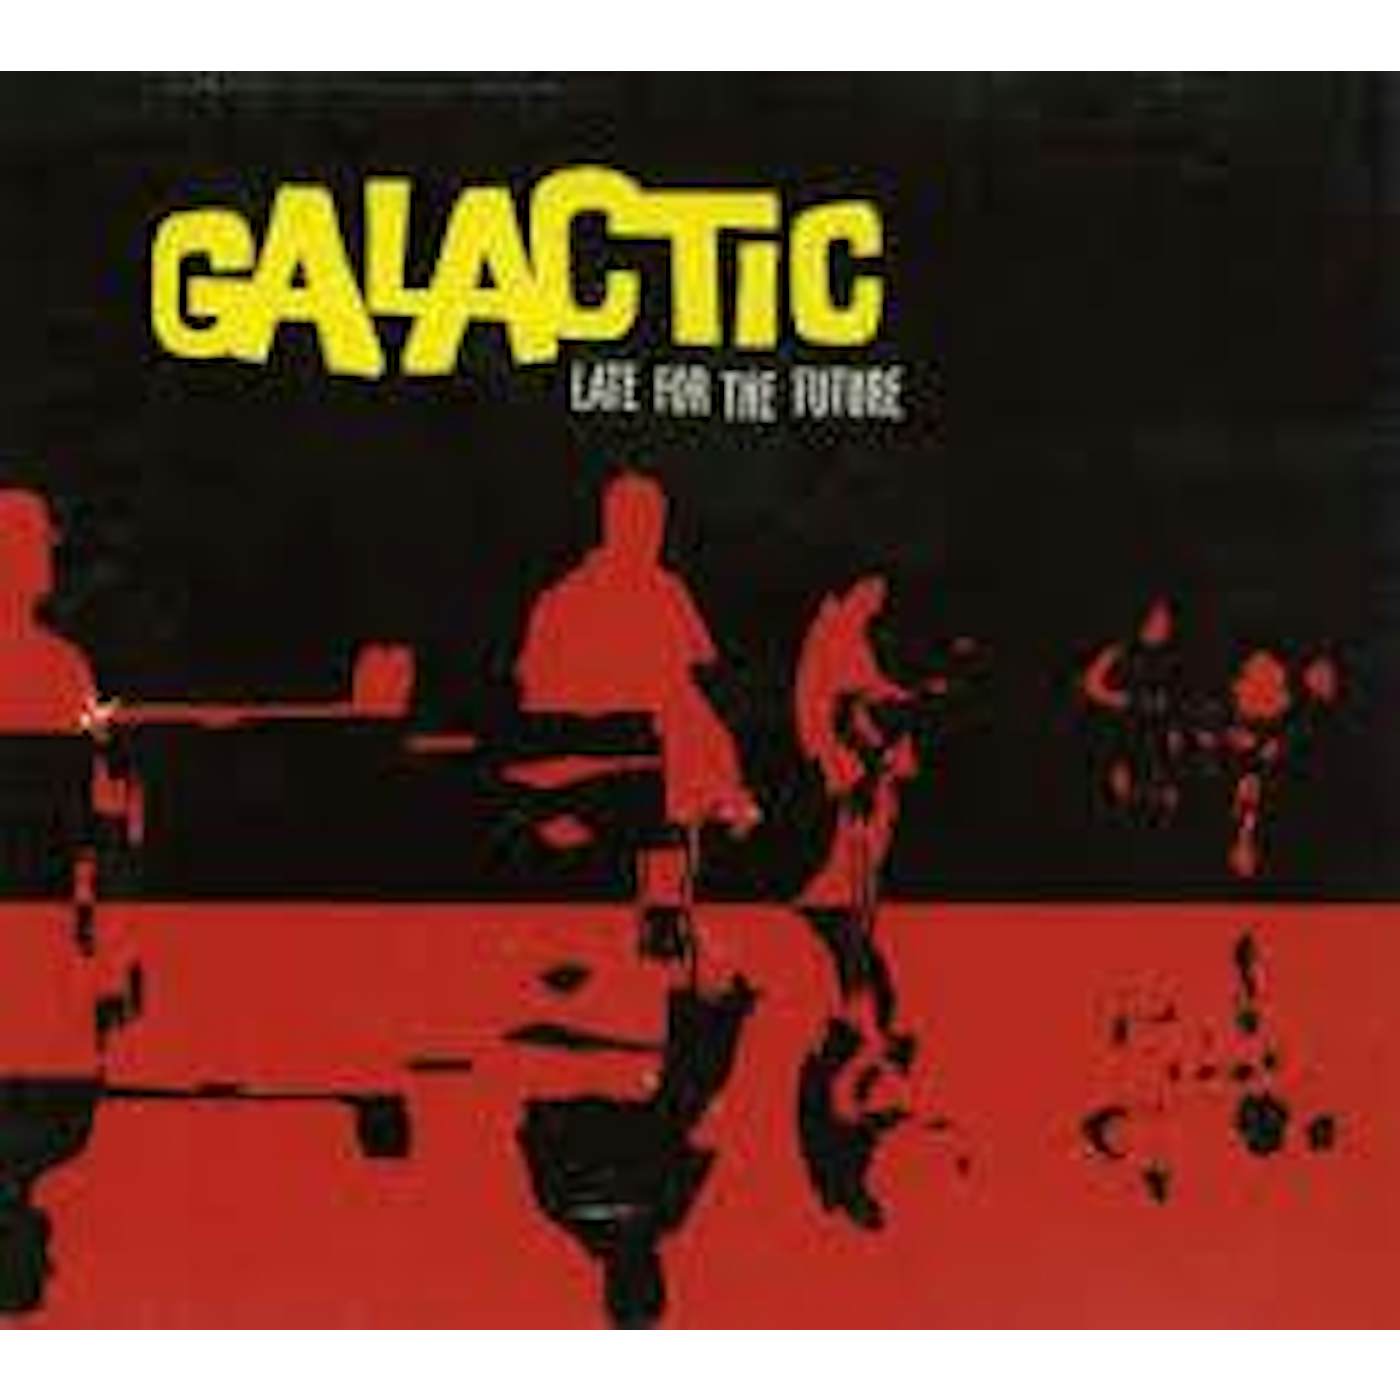 Galactic - Late For The Future CD